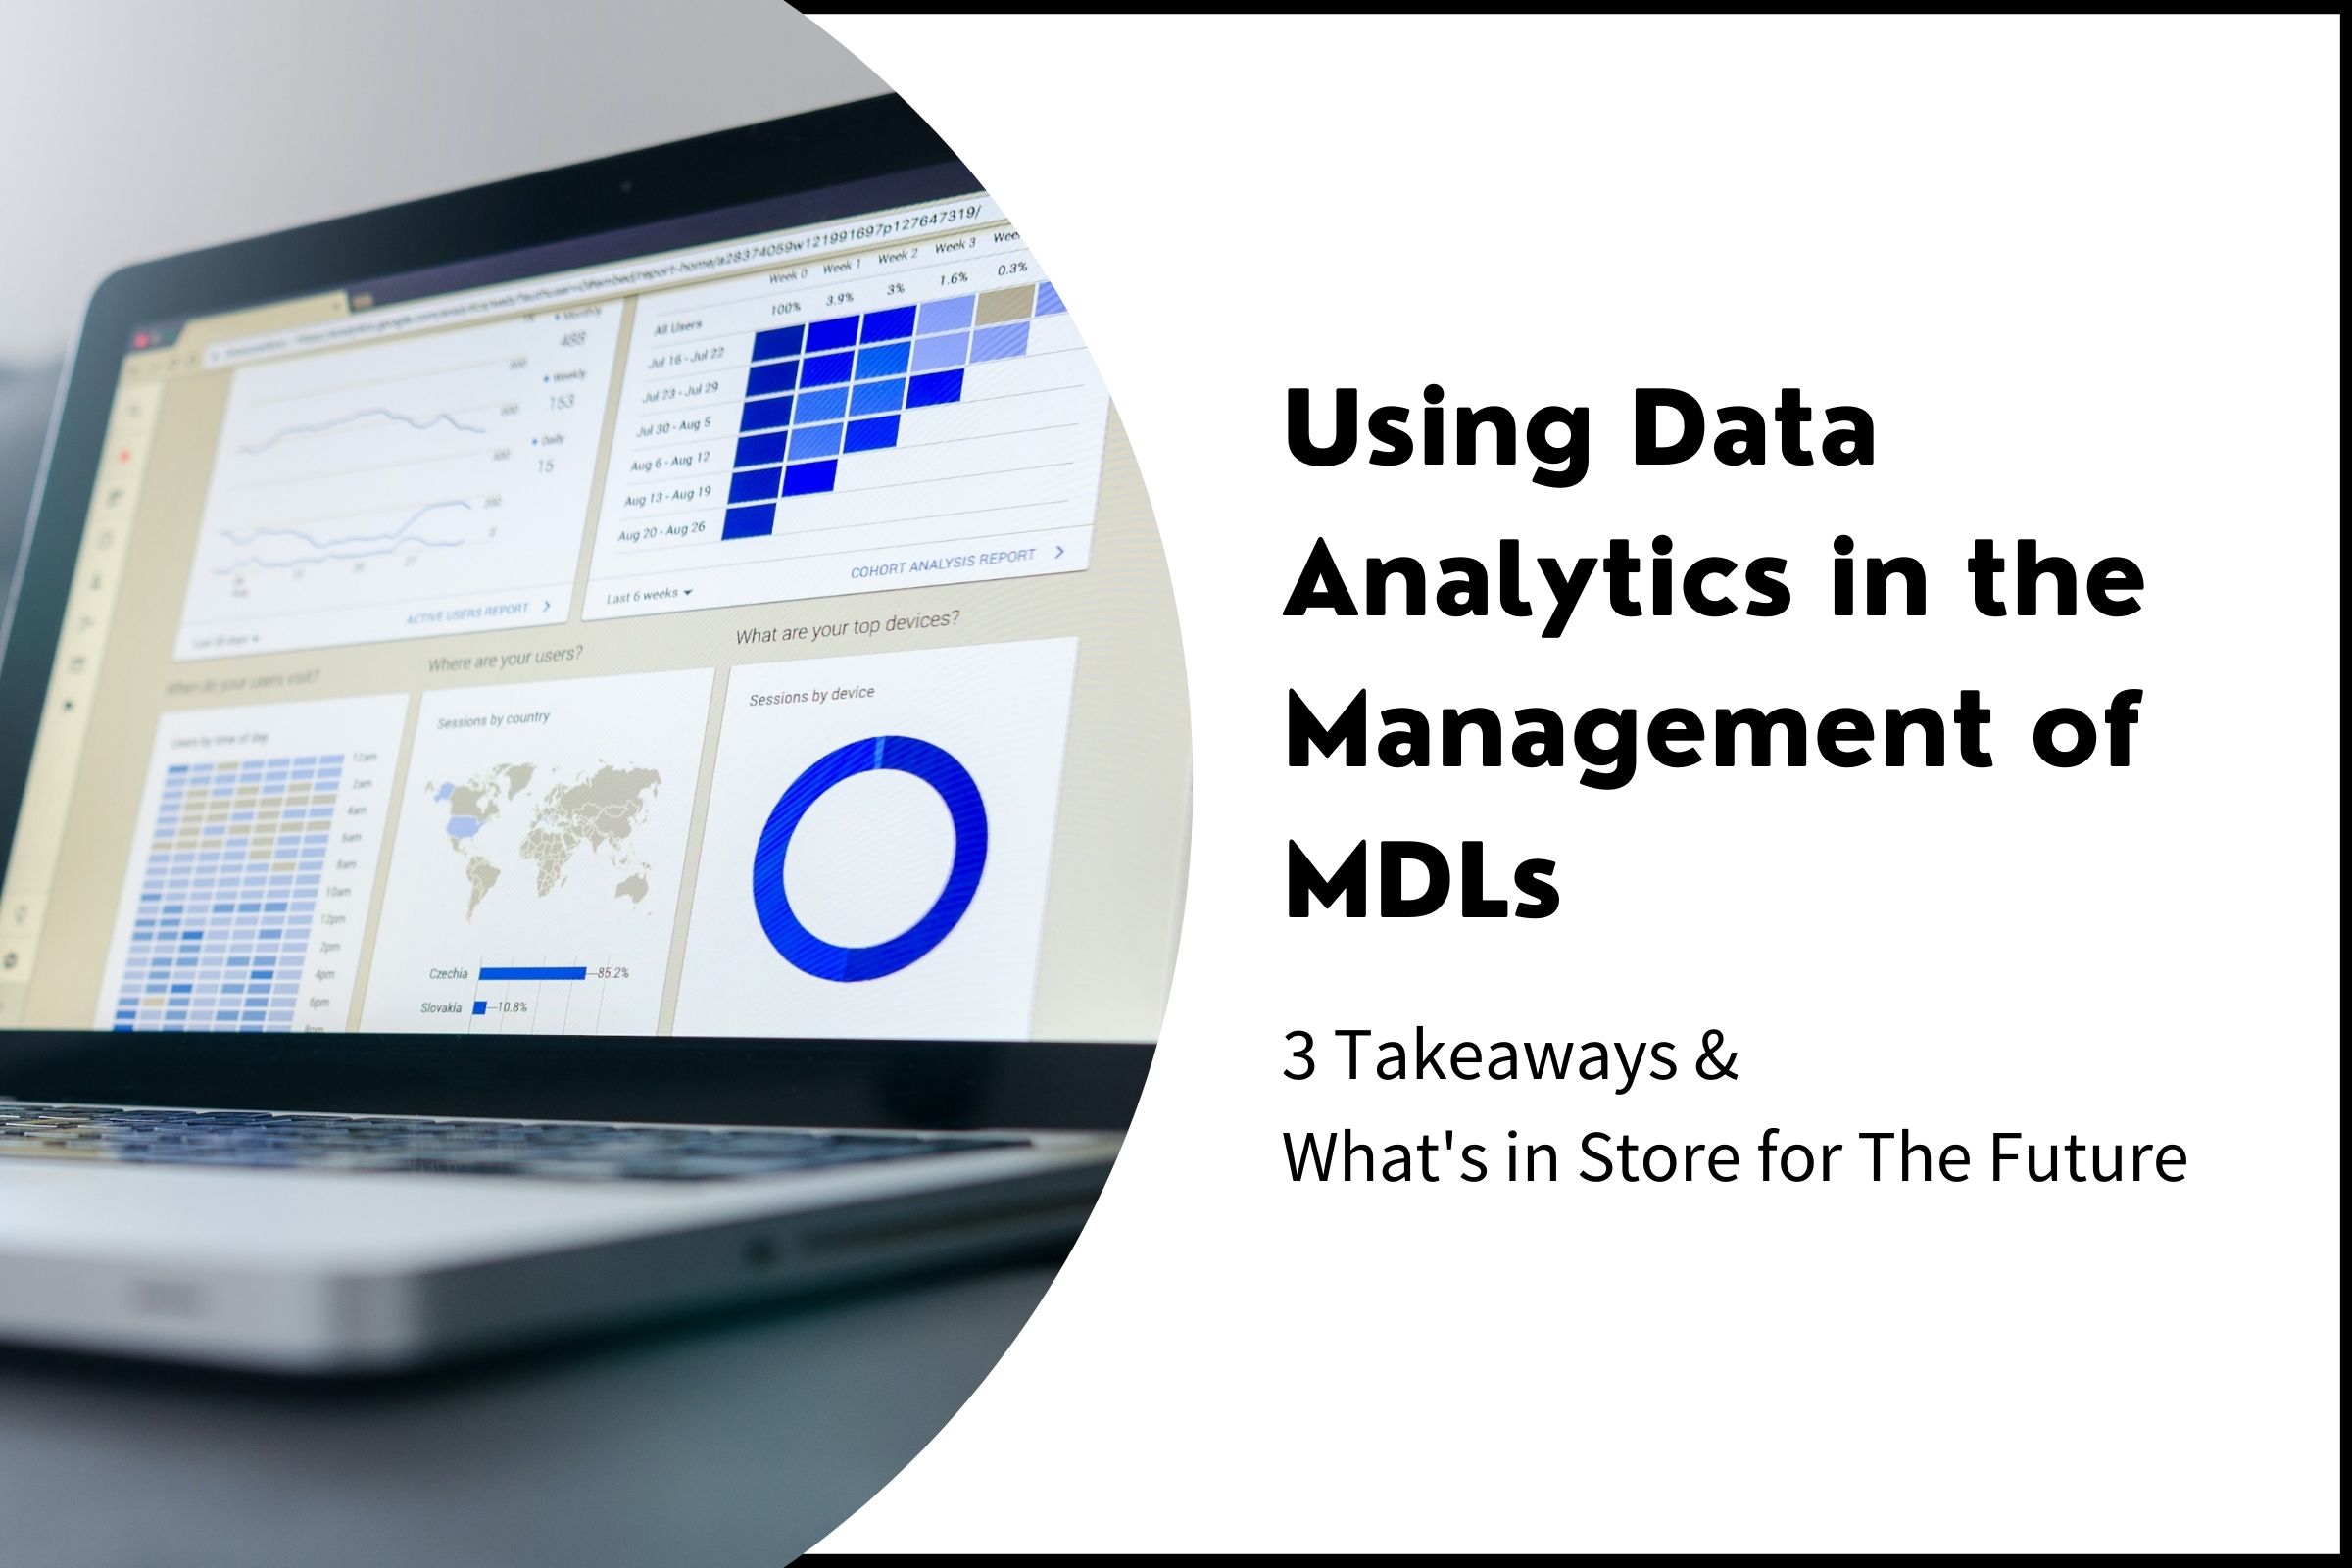 Using Data Analytics in the Management of MDLs: 3 Takeaways and What's in Store for The Future